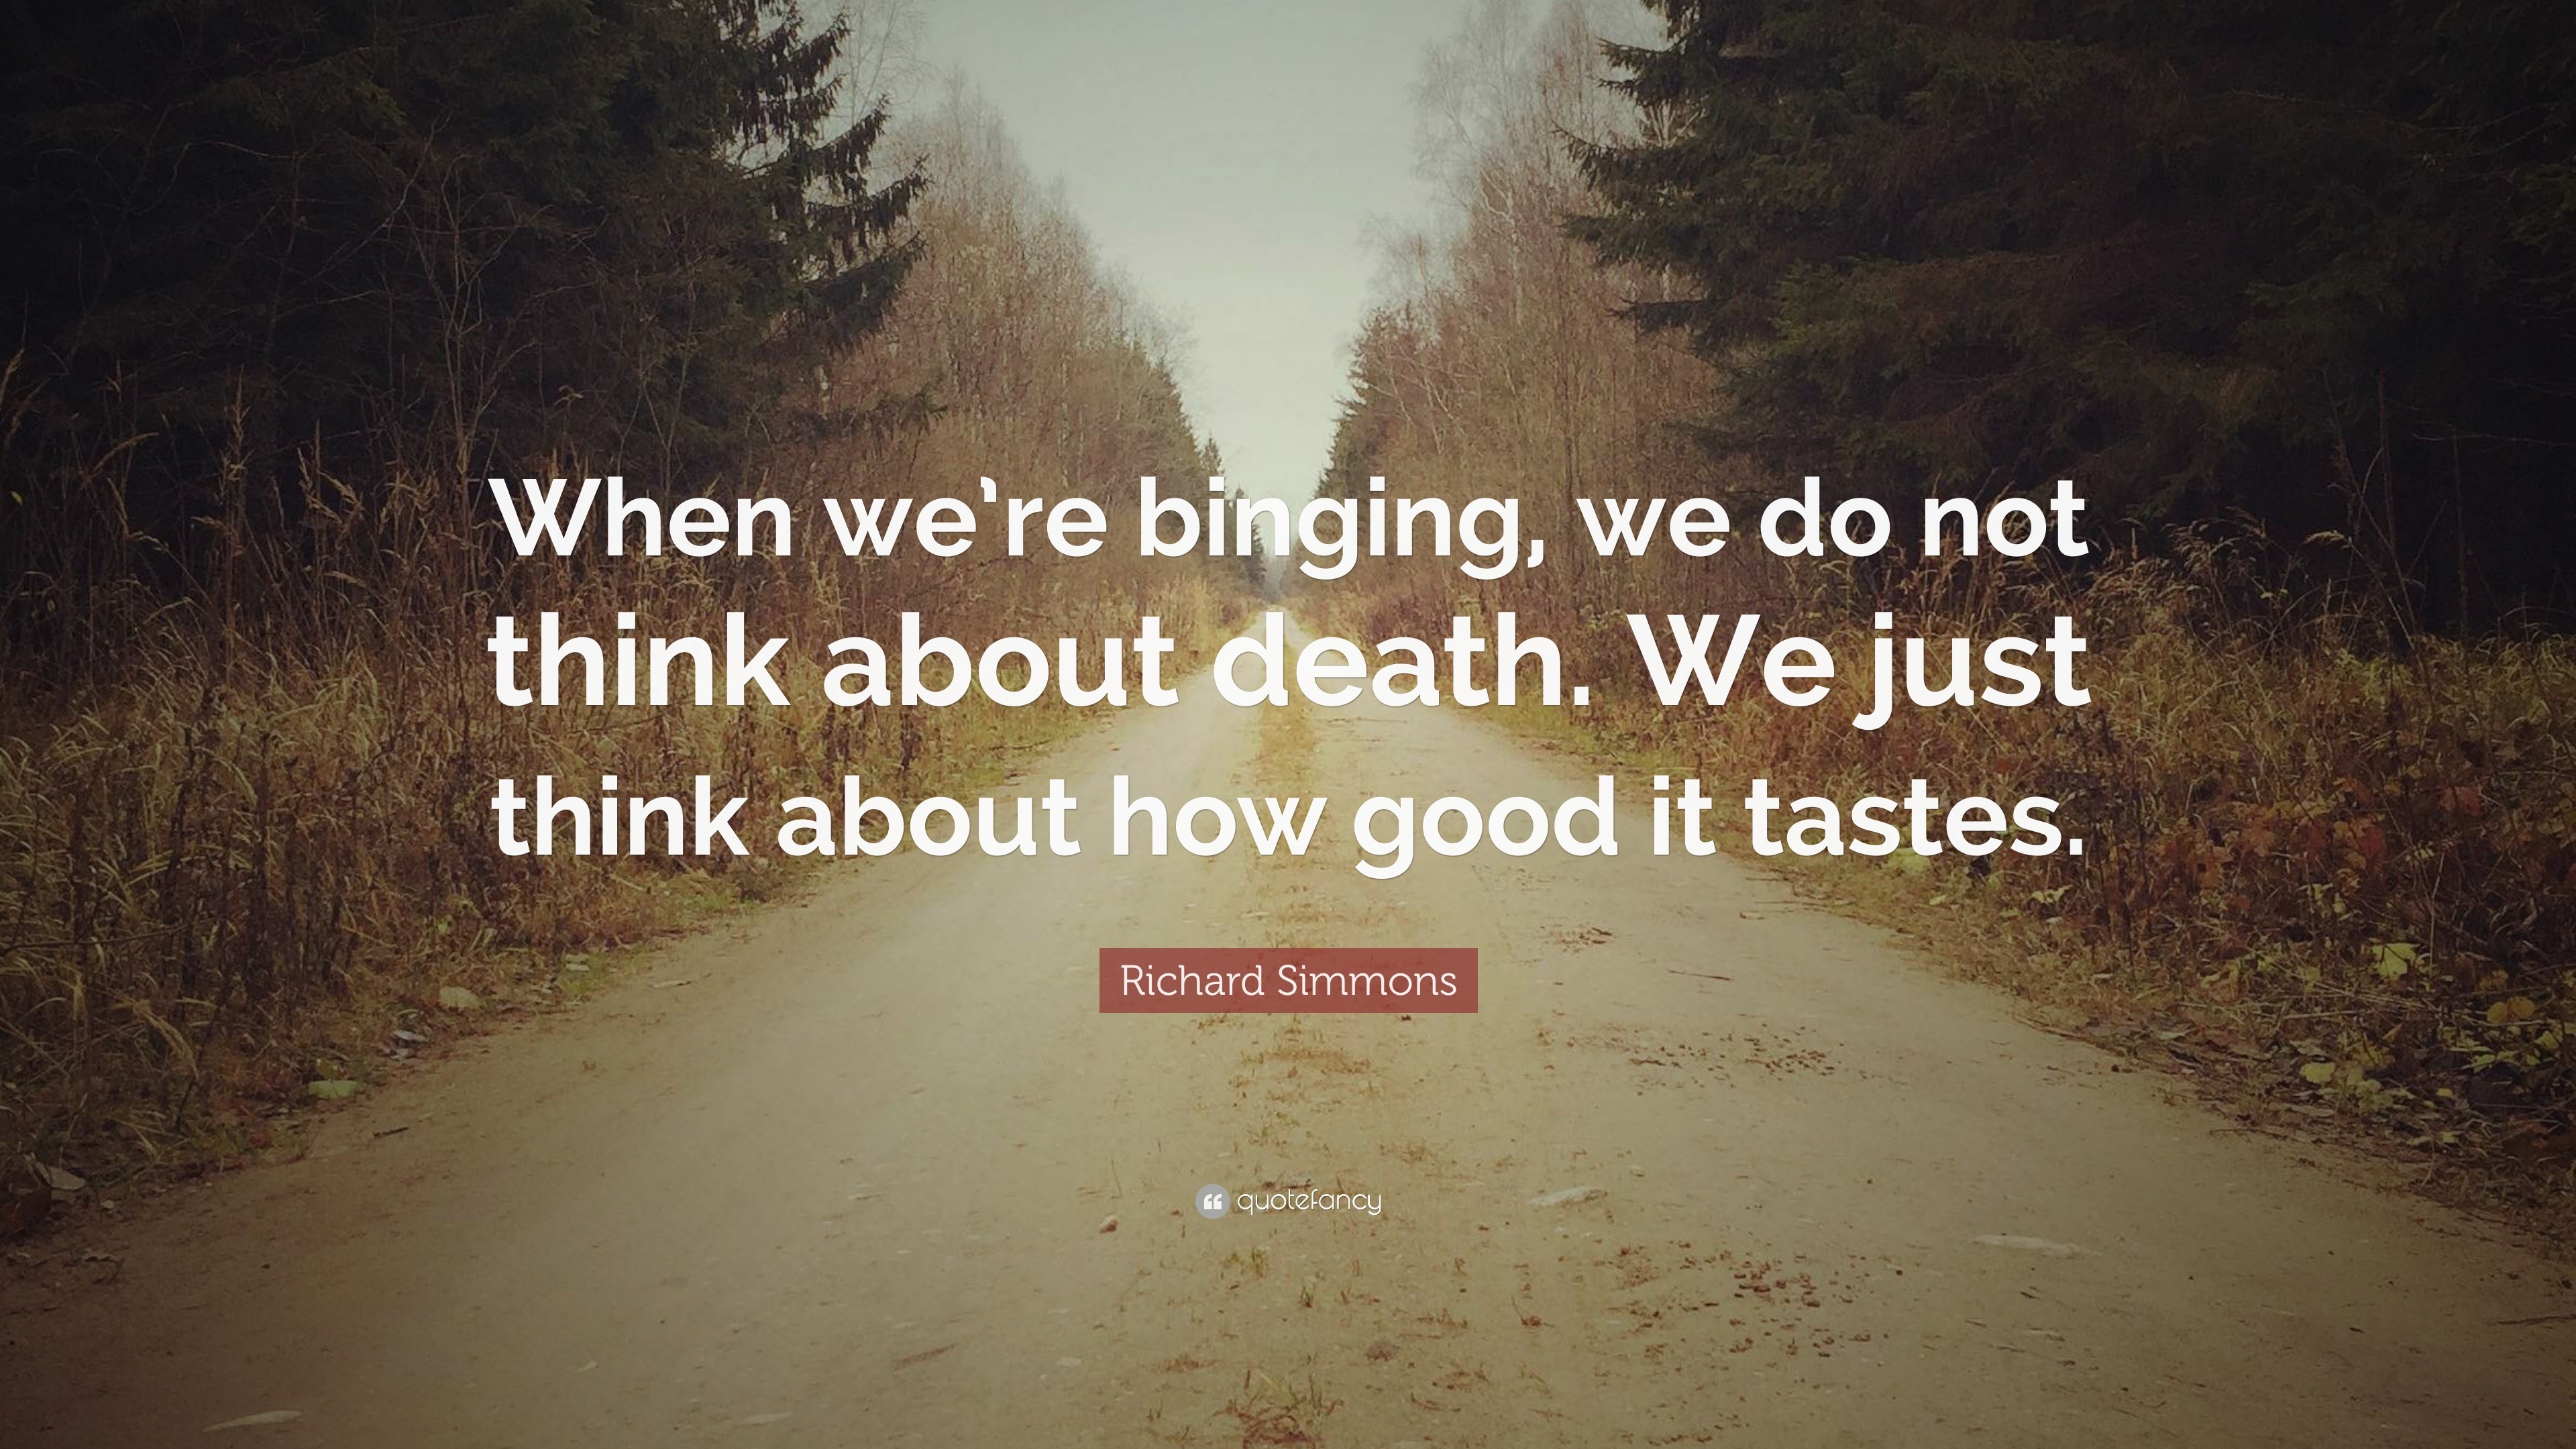 Richard Simmons Quote: “When we’re binging, we do not think about death ...